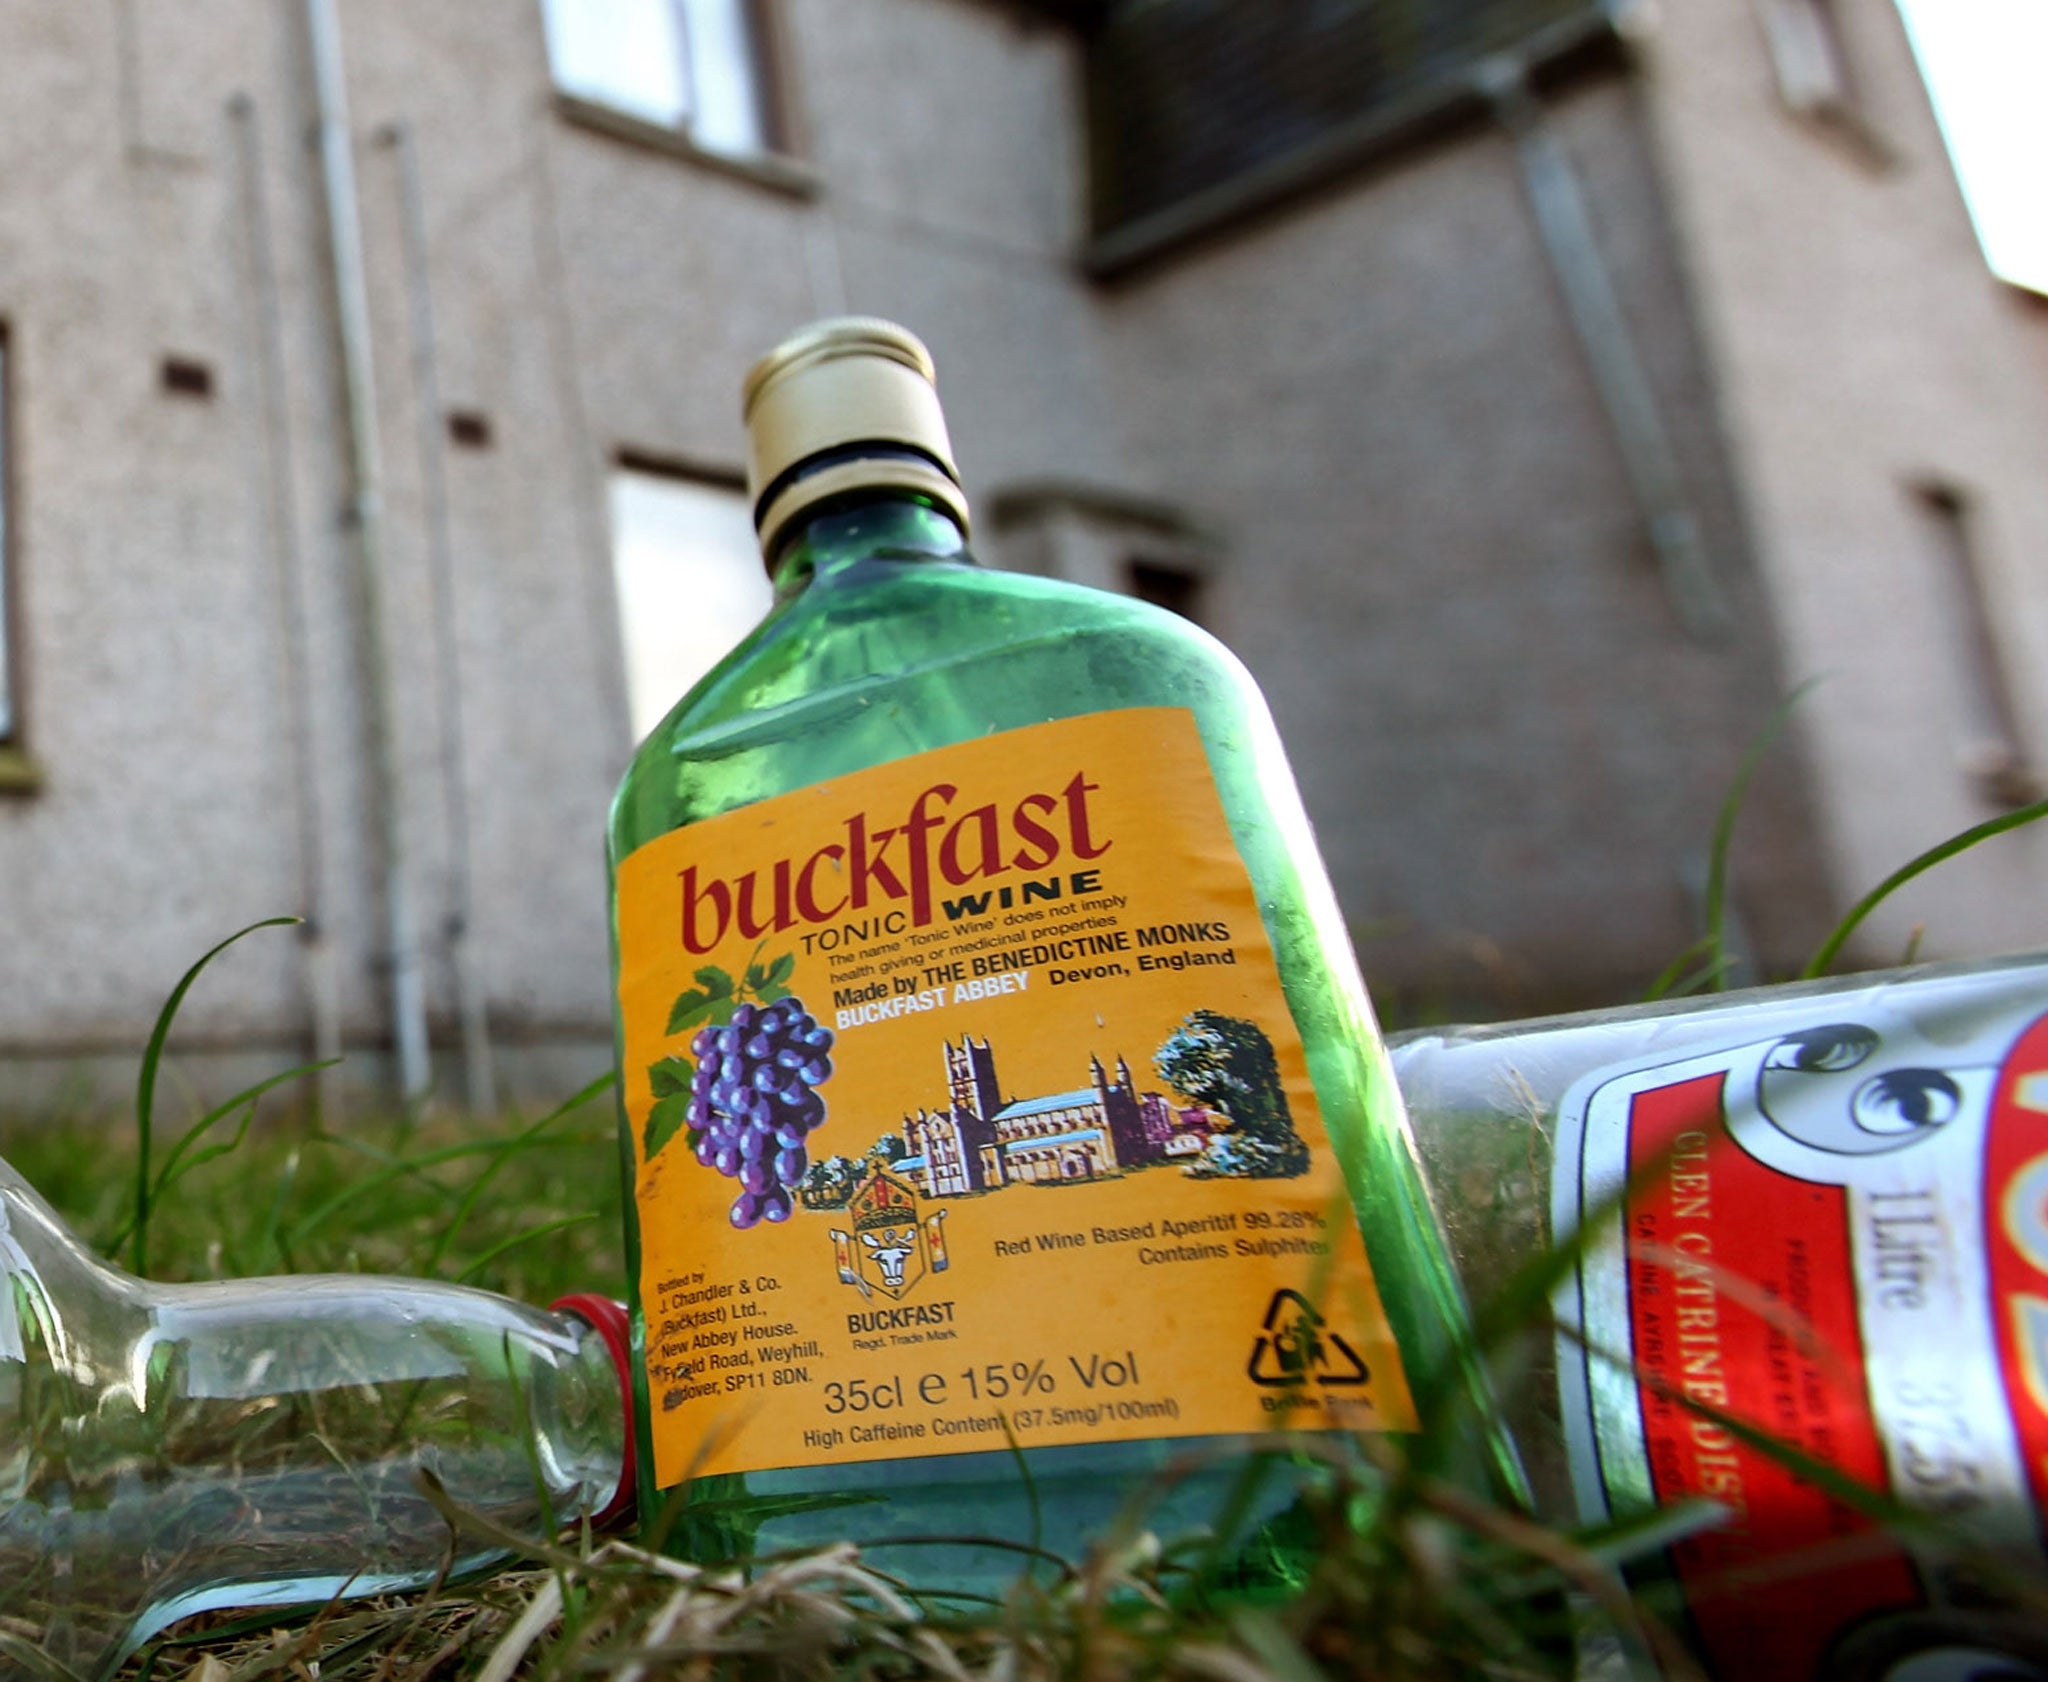 Buckfast contains 15 per cent alcohol and high levels of caffeine